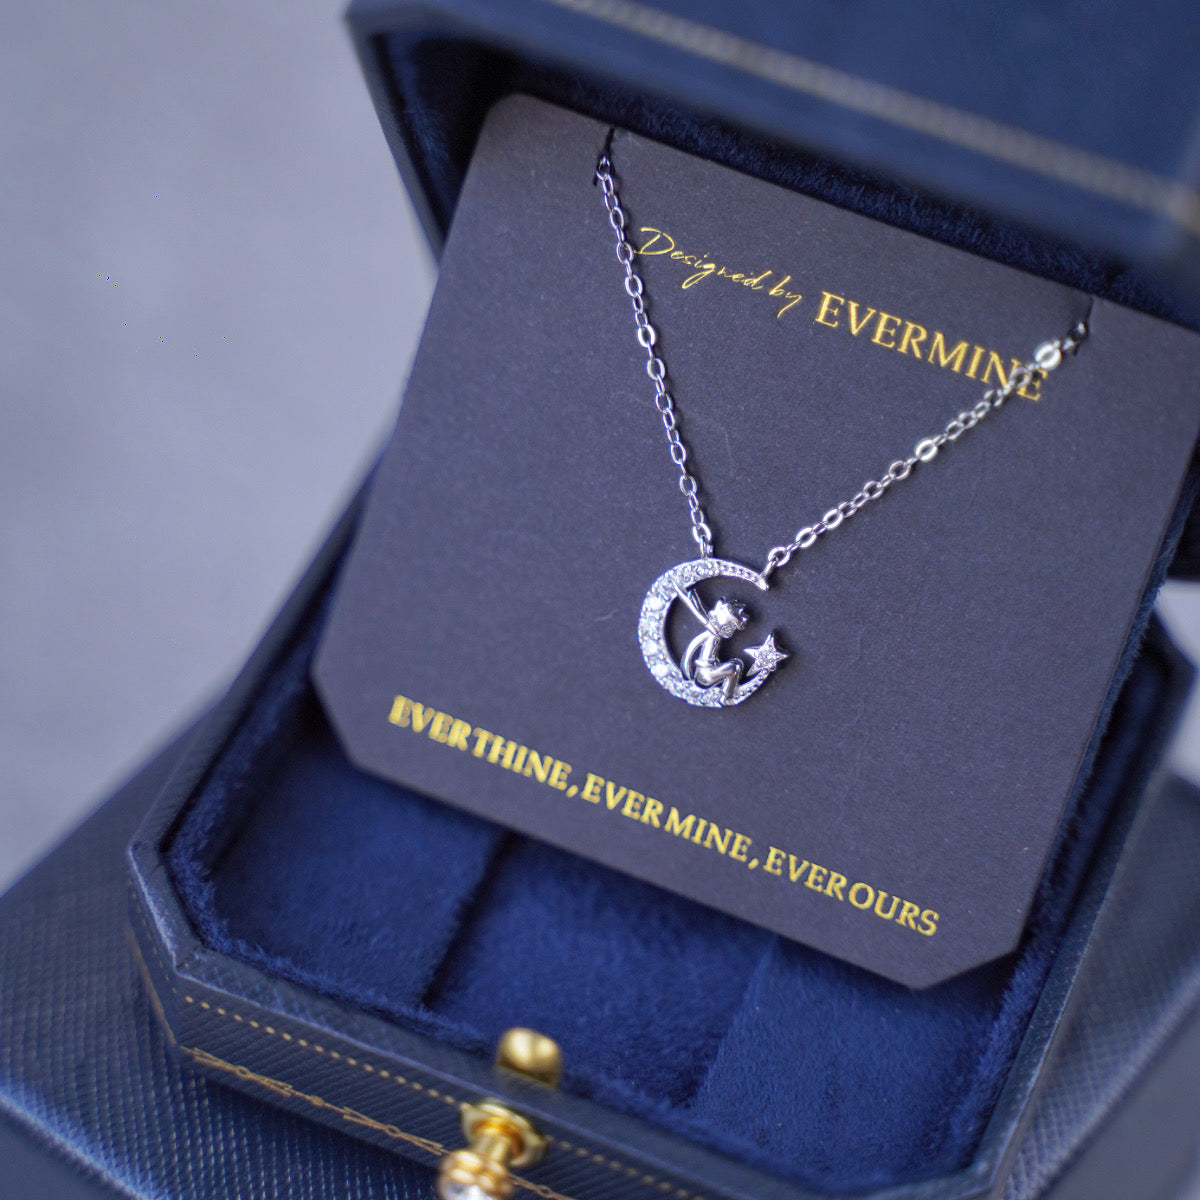 925 Silver Little Prince & Moon Necklace with Zirconia - Inspired by 'The Little Prince'